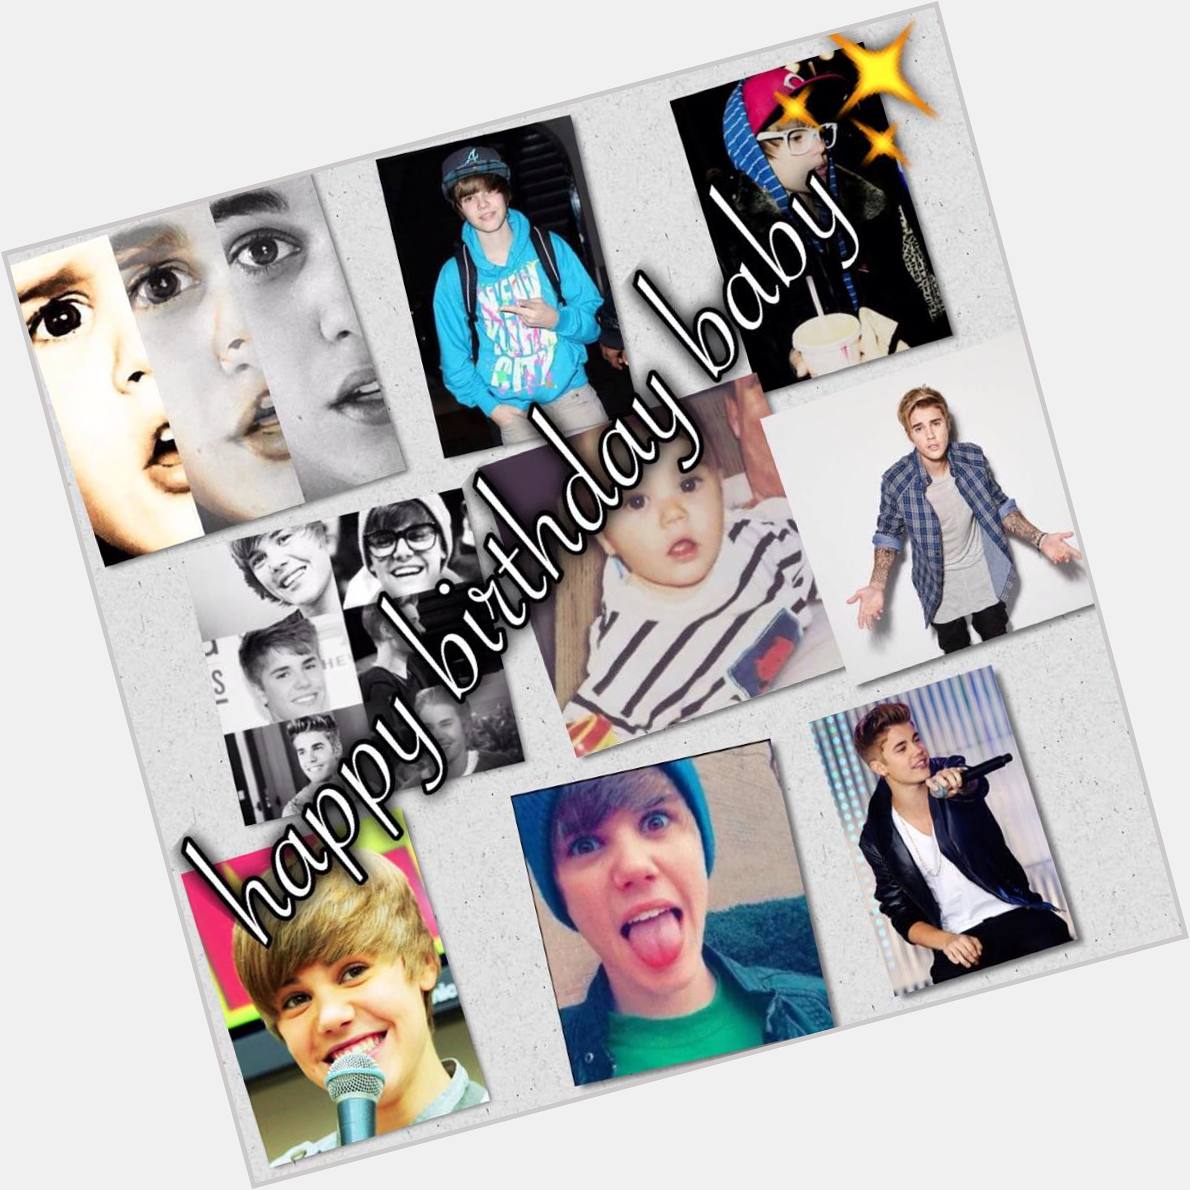 Happy birthday justin bieber Thank you for all you changed my life
You were and you will be always my idol 